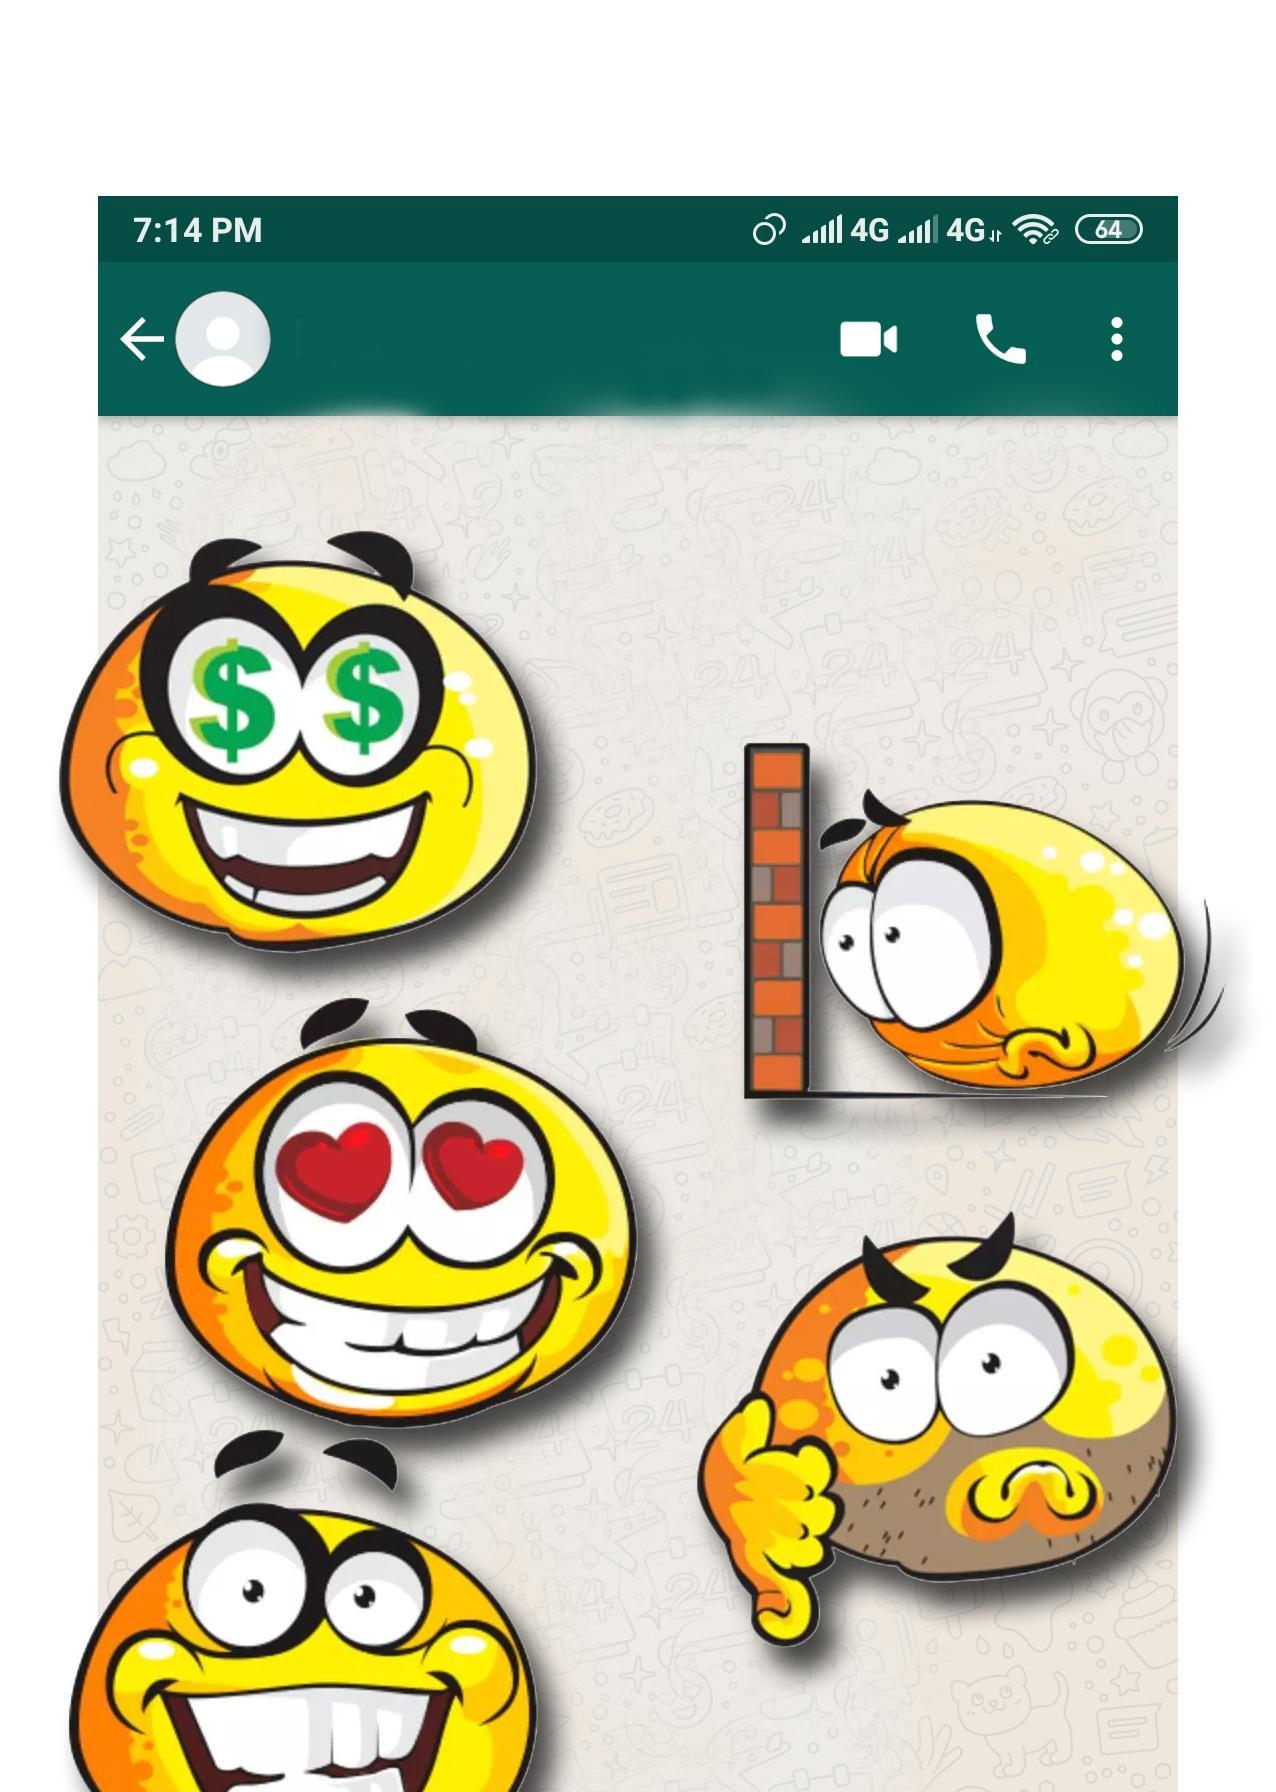 1000 Adult Emoji Wa Sticker Apps For Android Apk Download